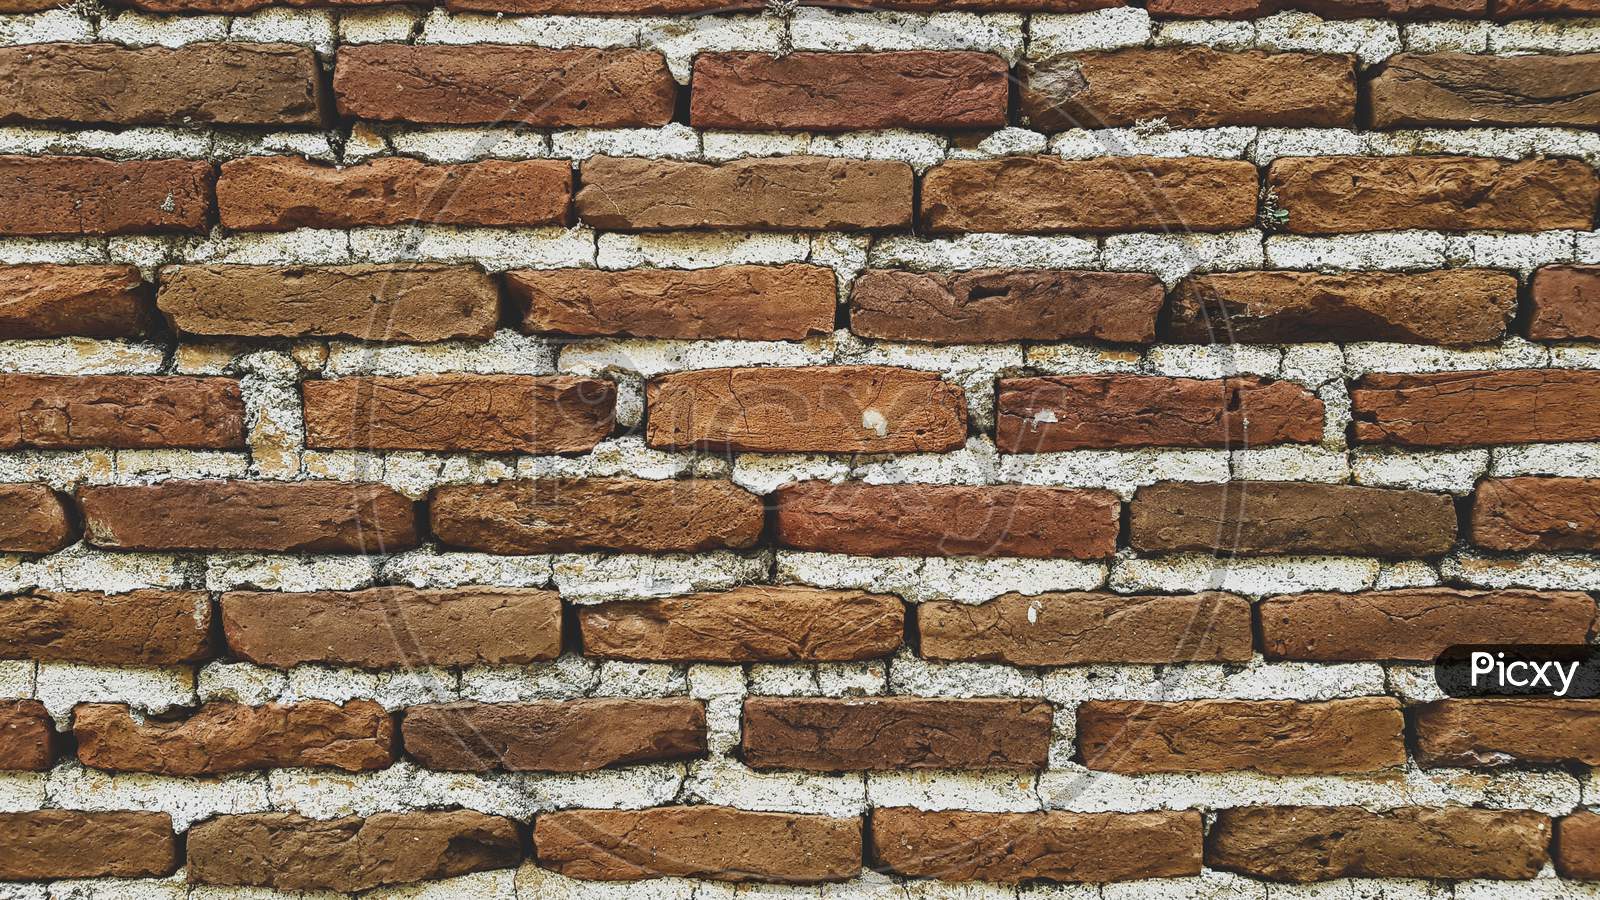 Brick Wall With Cement Mortar Close-Up.